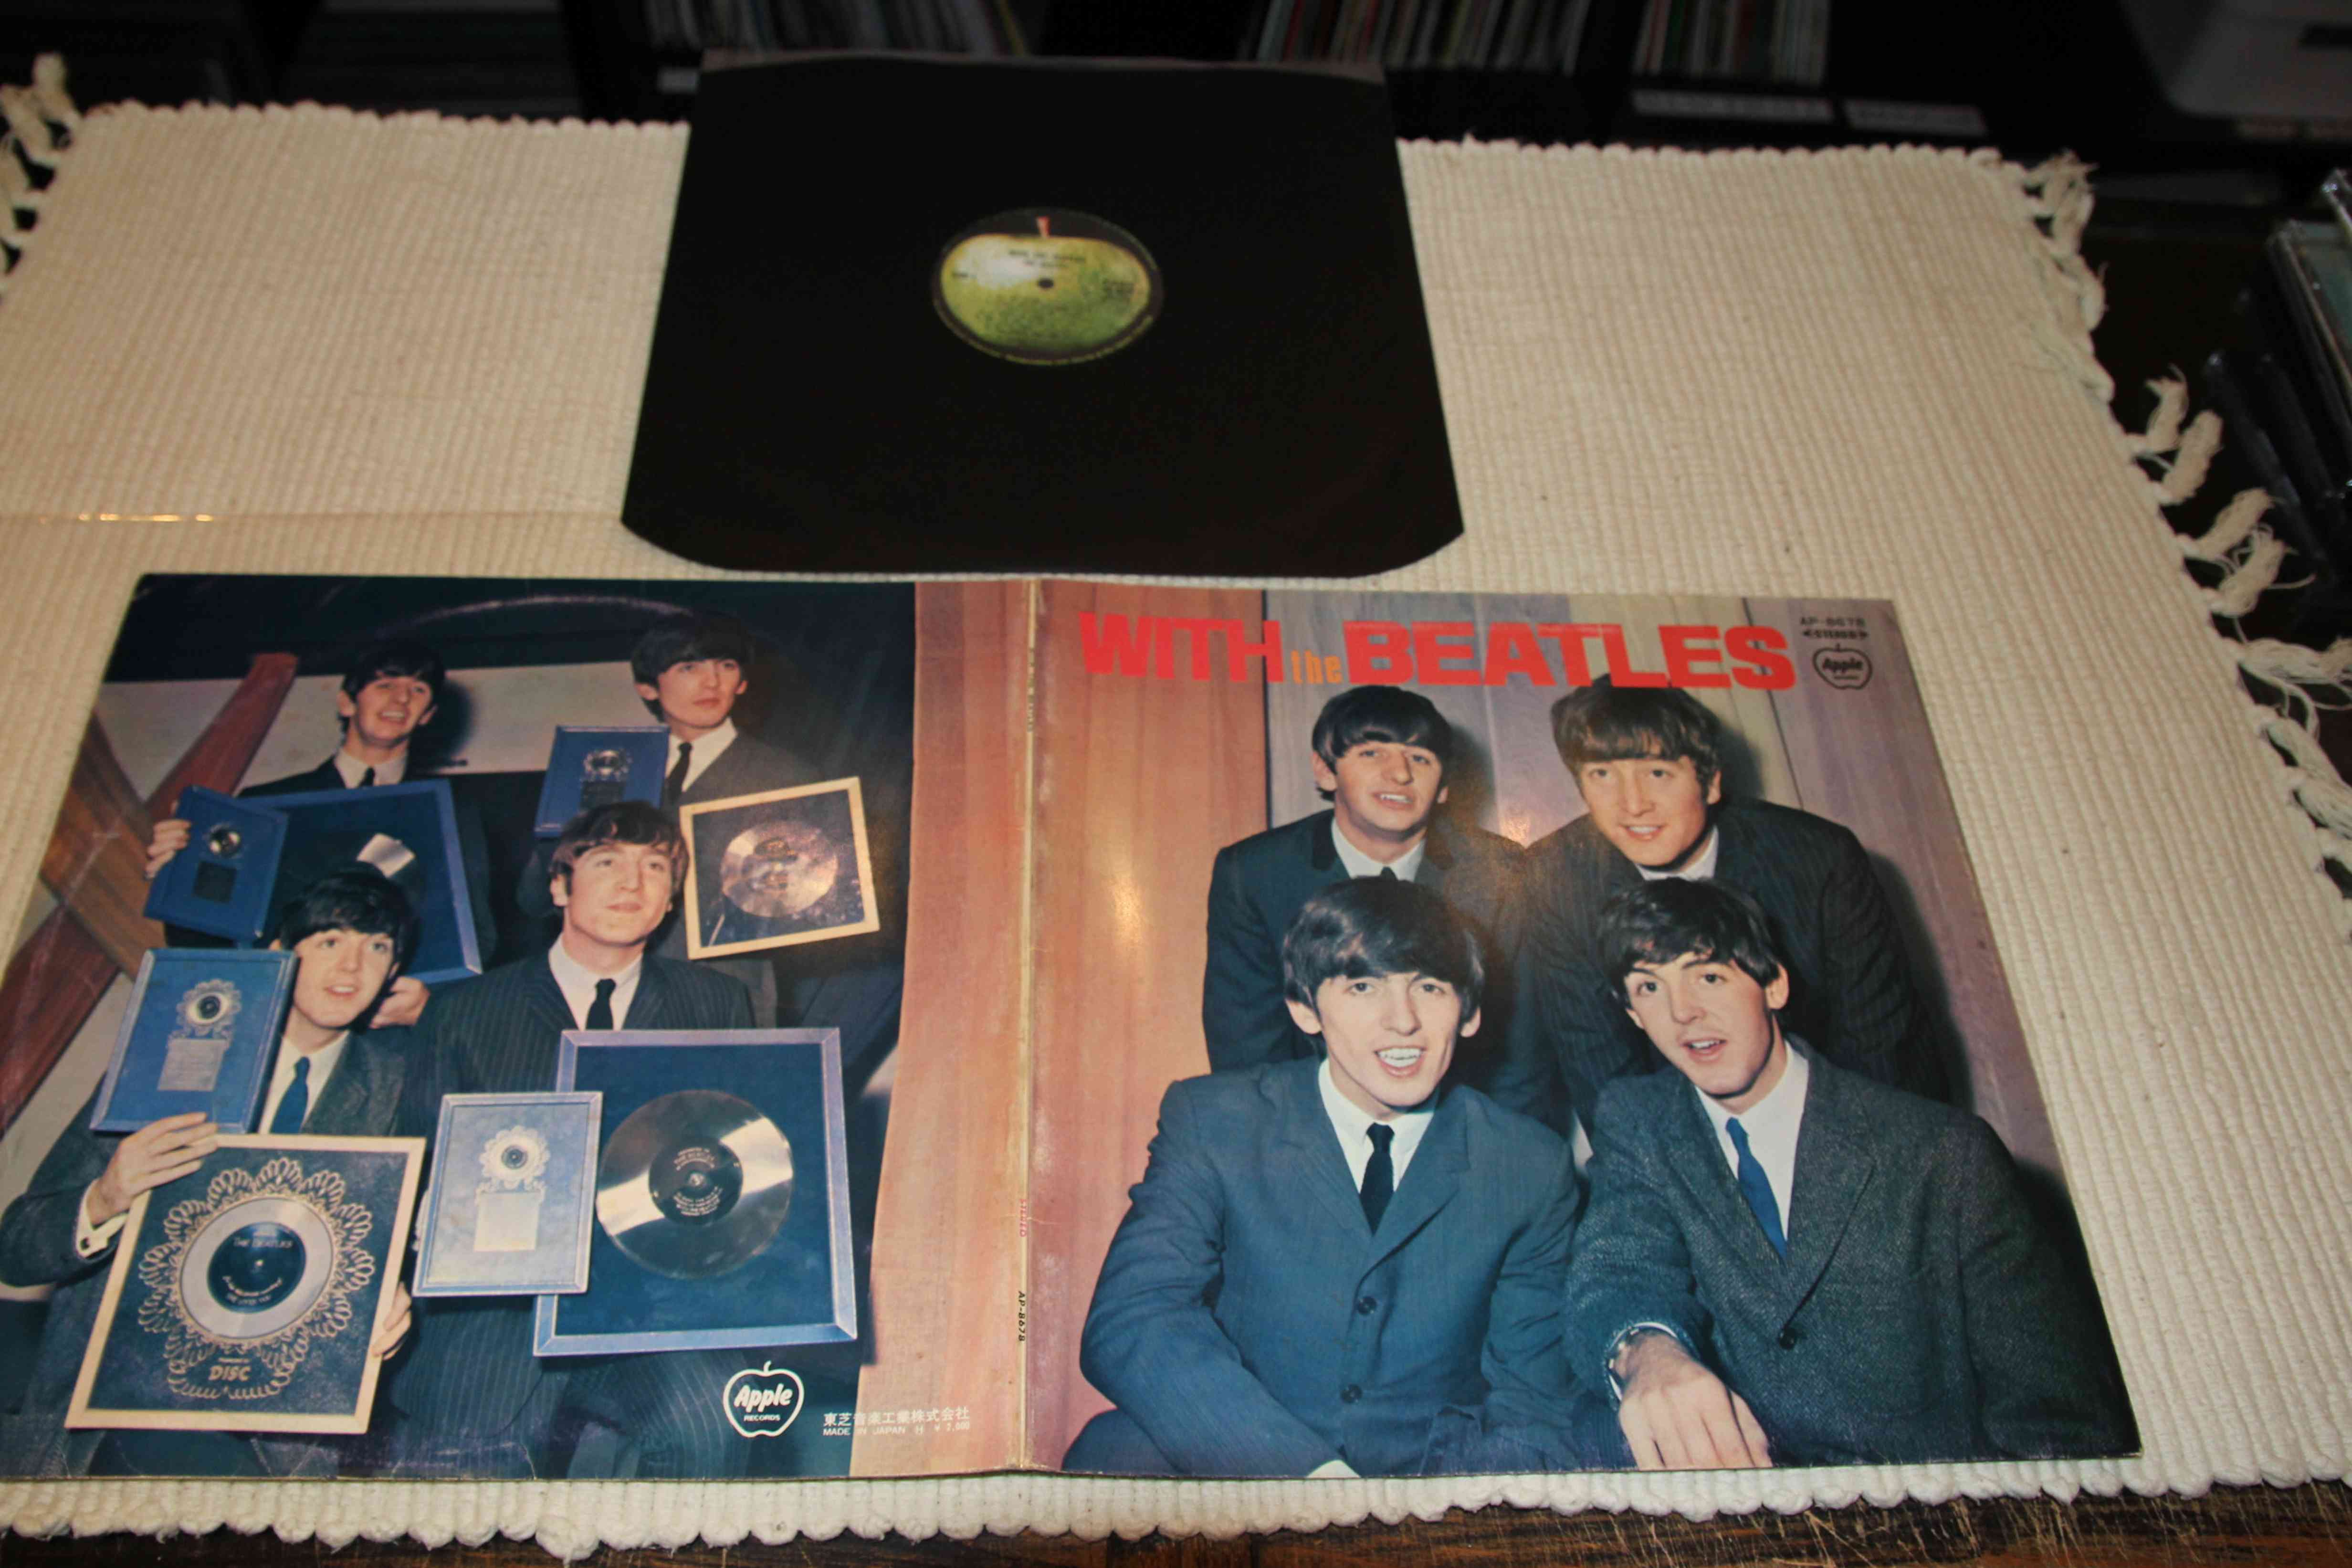 BEATLES - WITH THE BEATLES - JAPAN